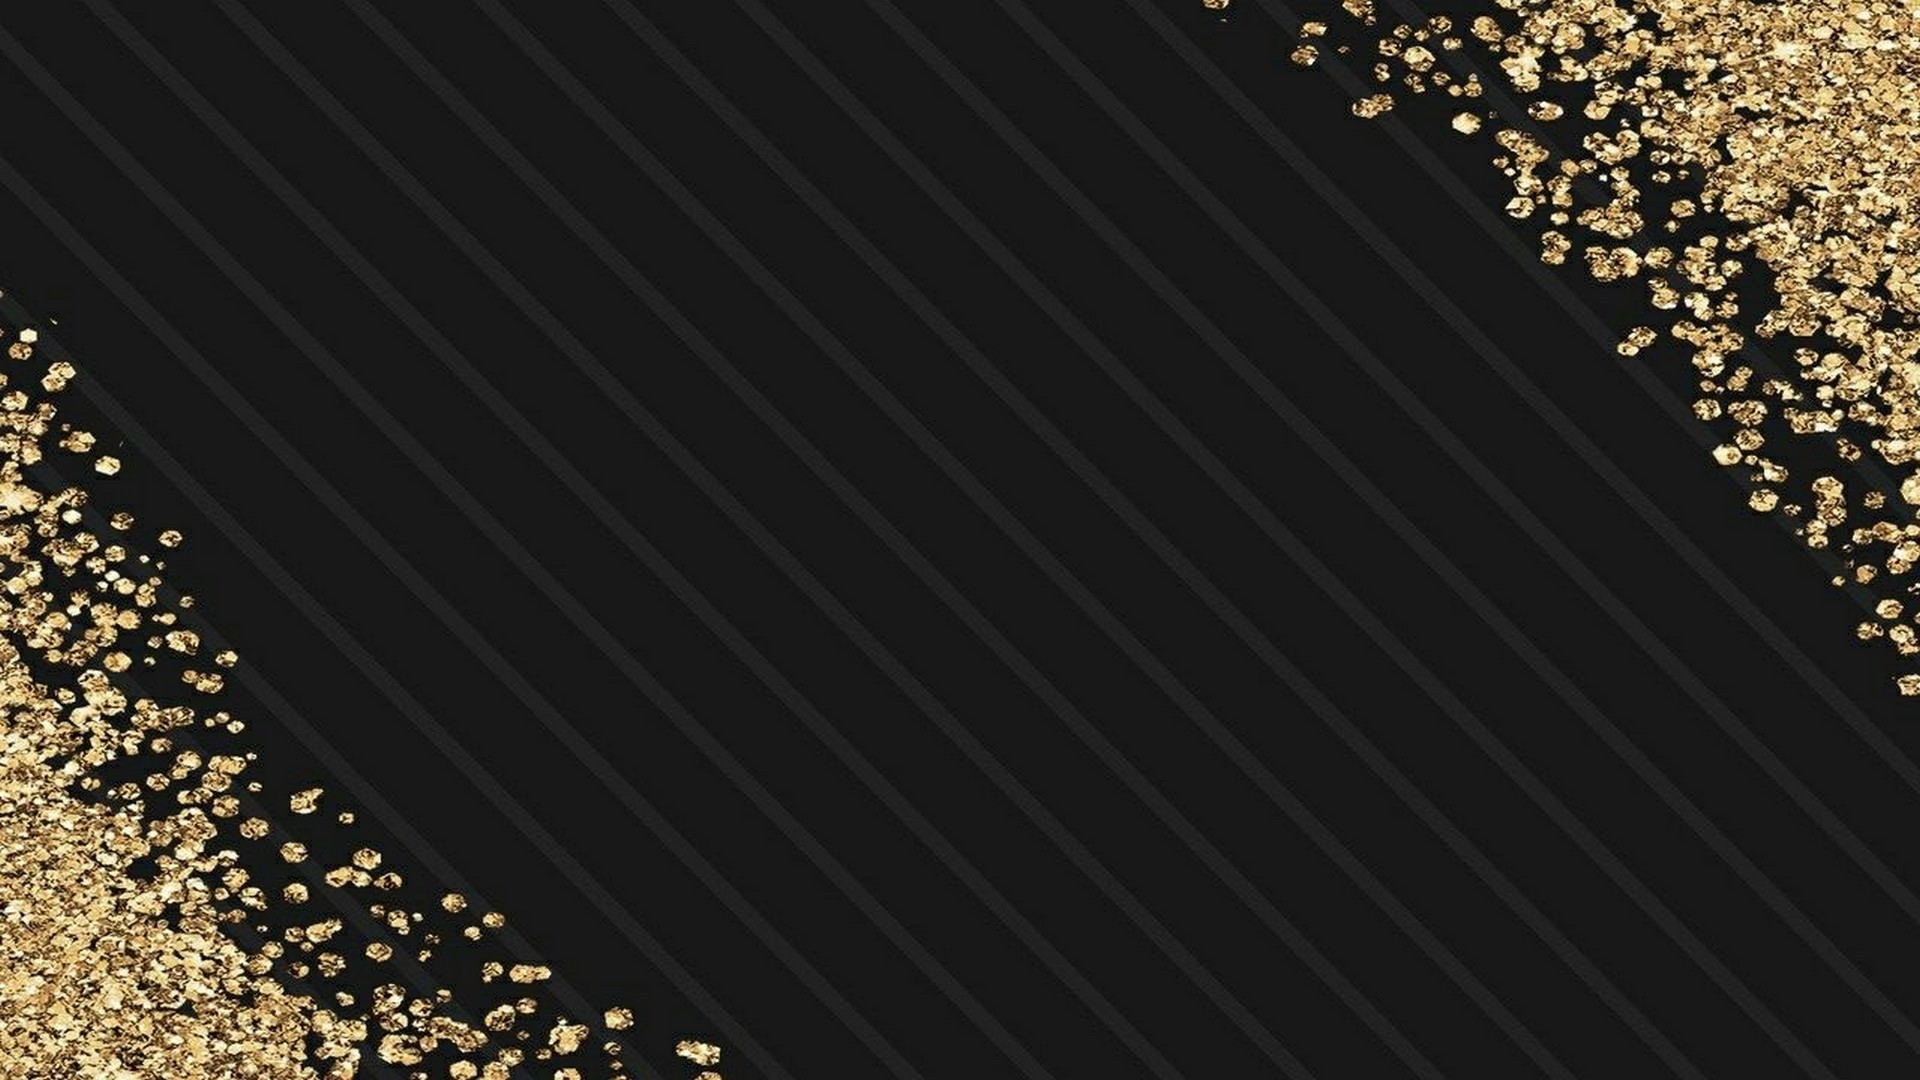 Black and Gold Desktop Backgrounds With Resolution 1920X1080